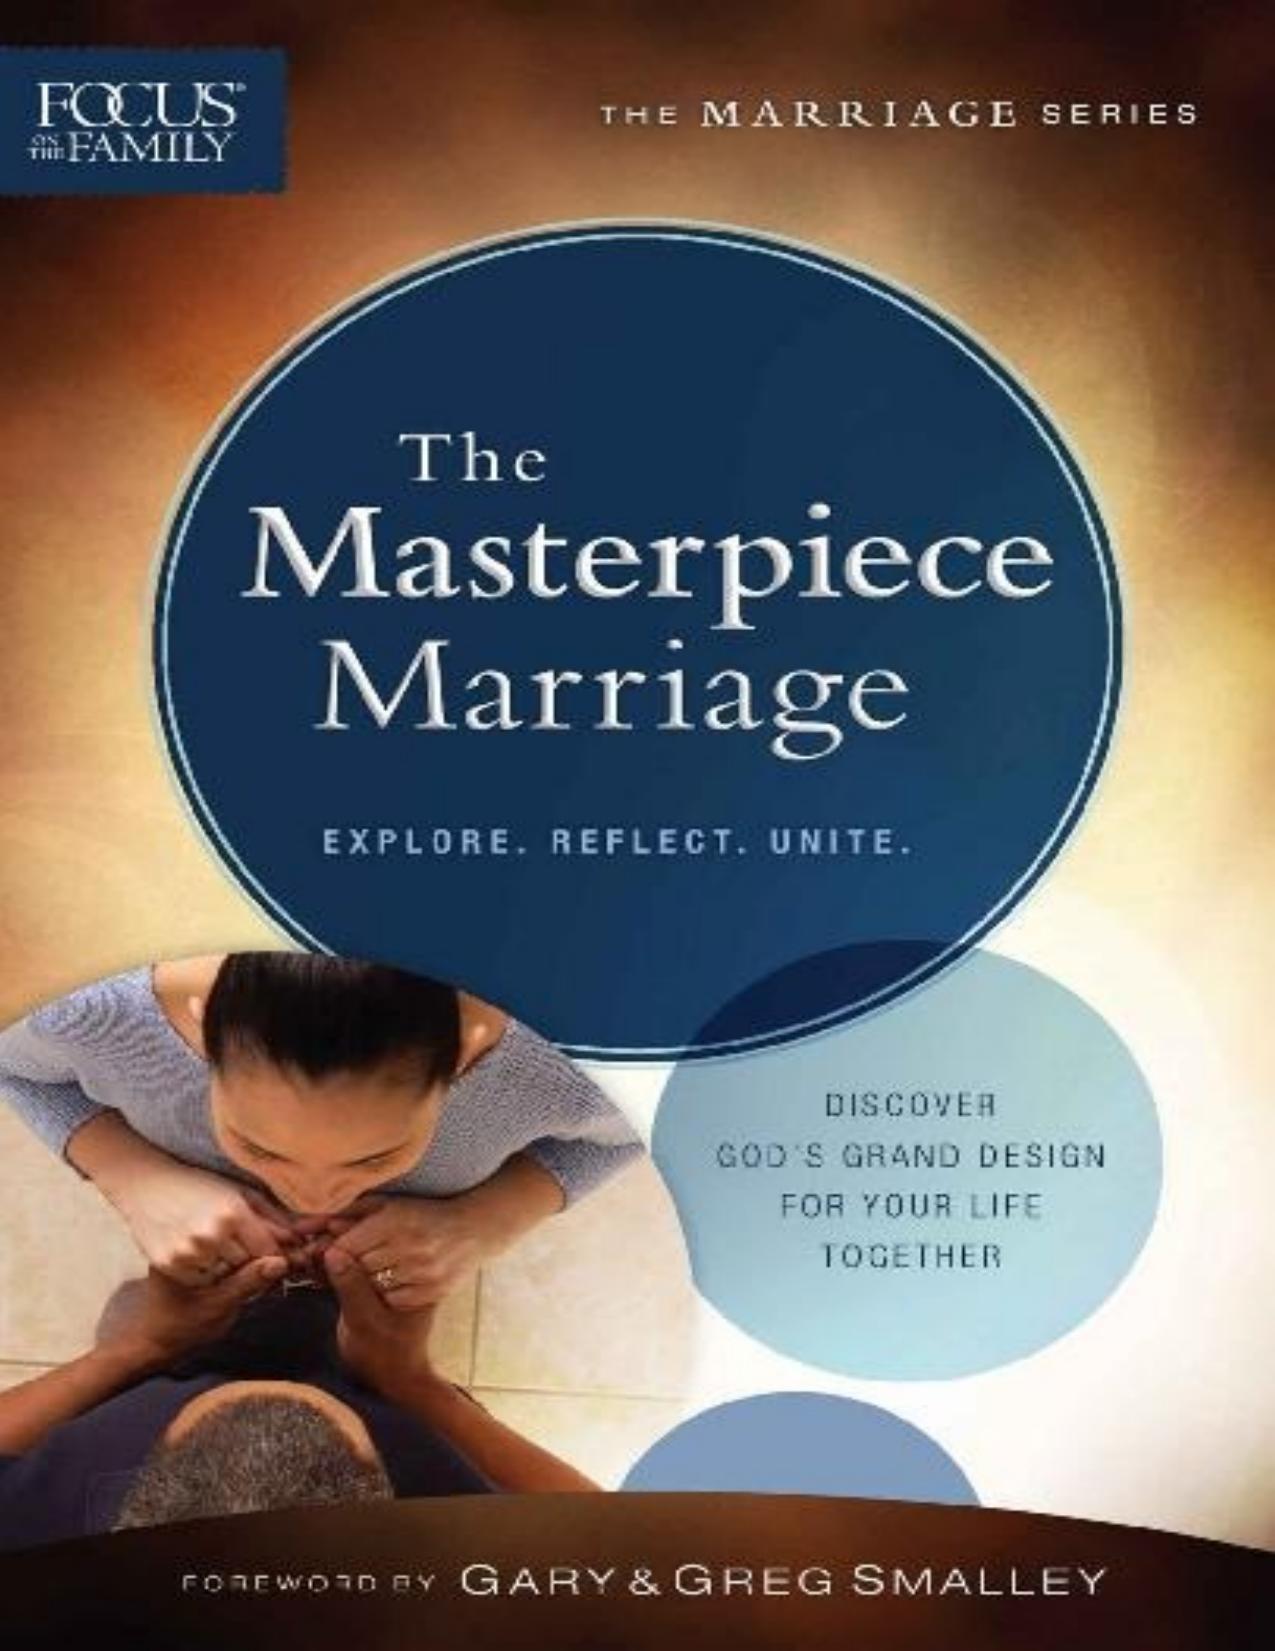 The Masterpiece Marriage \(Focus on the Family Marriage Series\) - PDFDrive.com